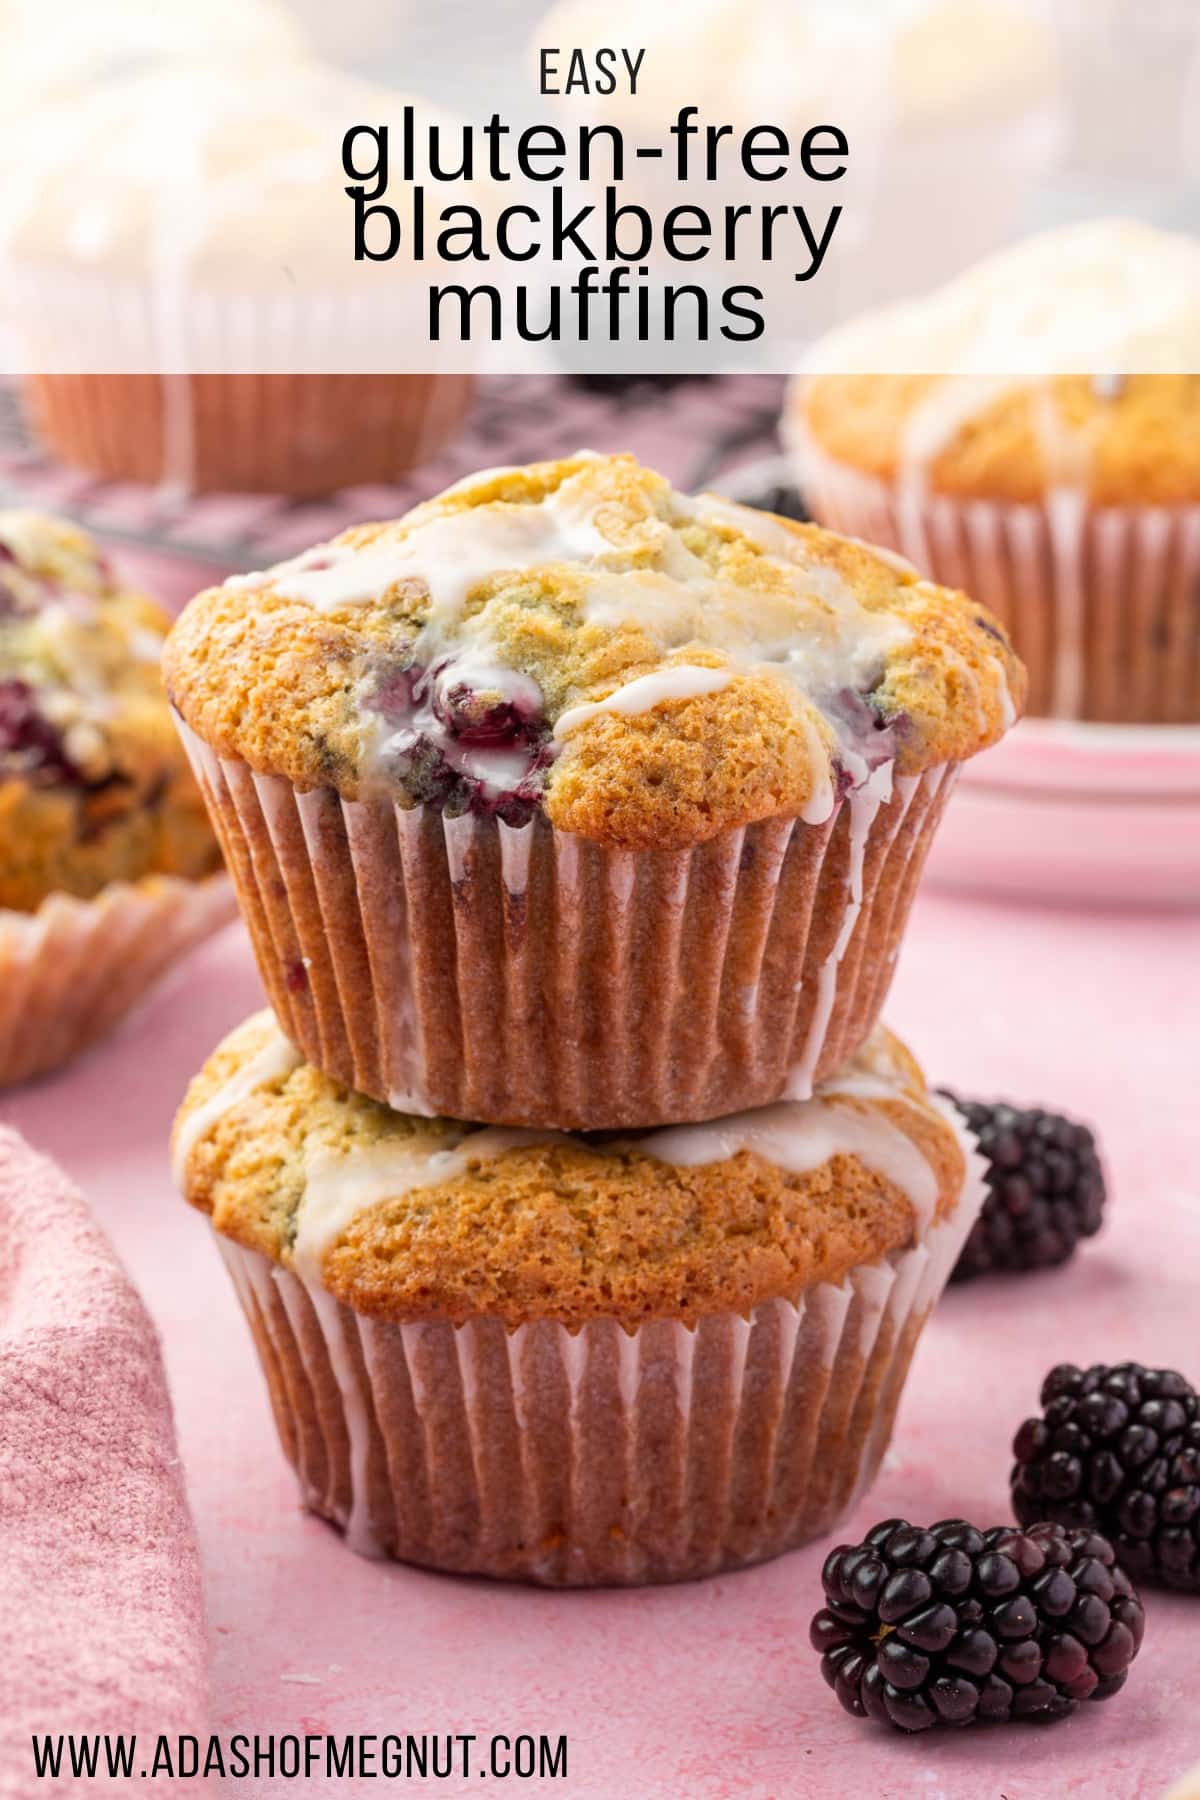 A stack of two gf blackberry muffins with fresh blackberries on the surface.